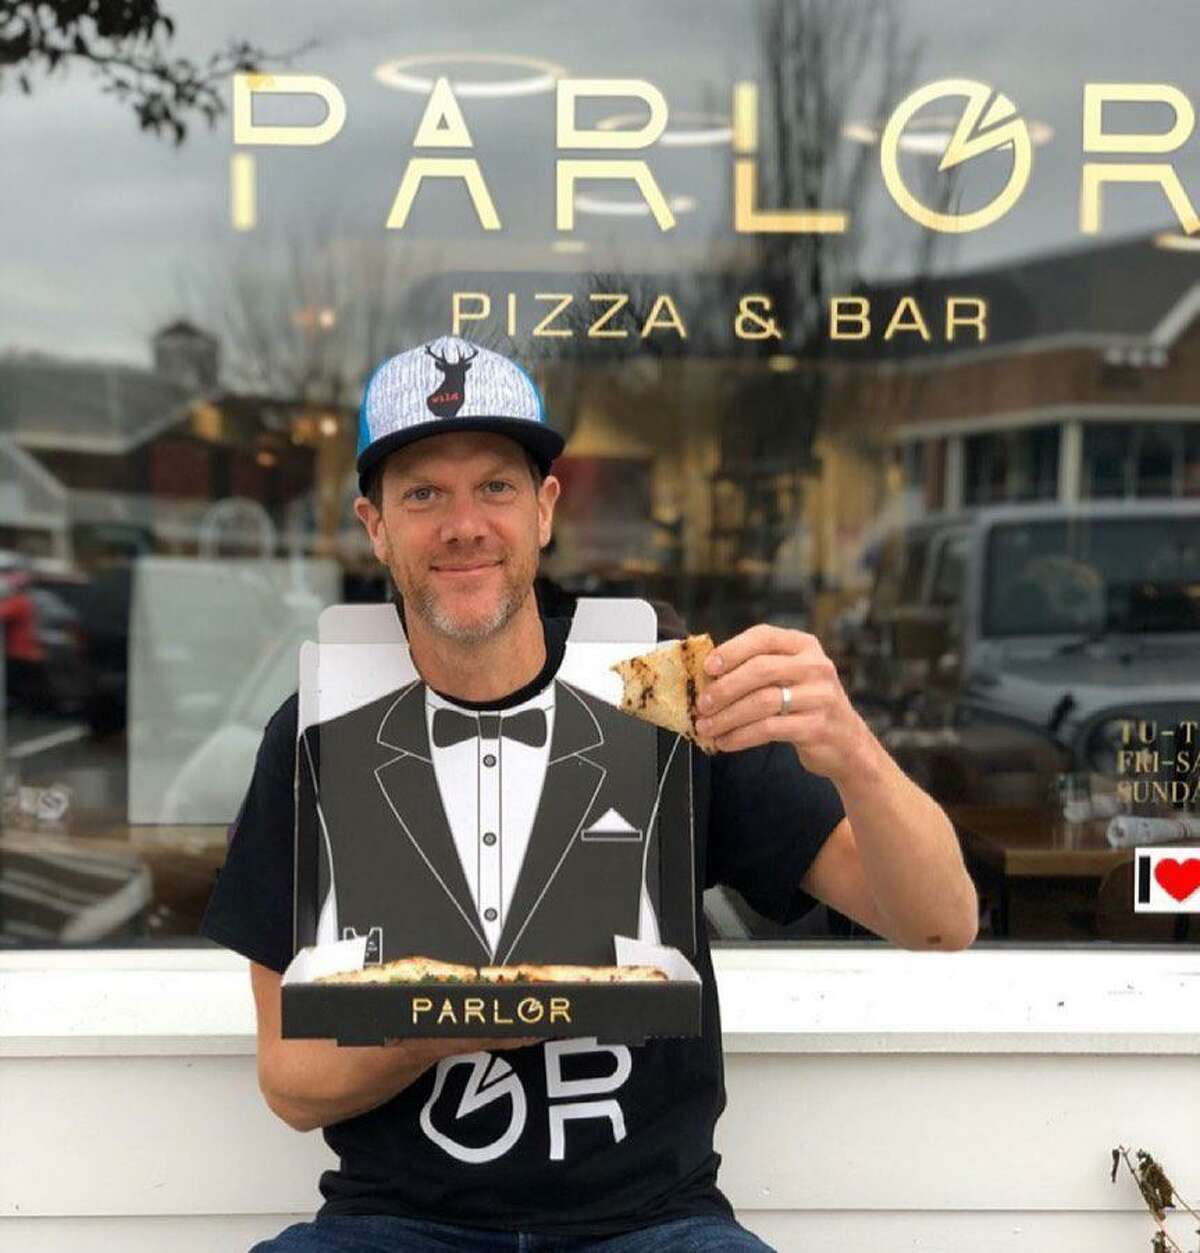 Parlor owner and Wilton resident Tim Labant is looking forward to bringing his acclaimed brick-oven restaurant, reviewed as “superb” by Connecticut Magazine, to Darien in early April. The location will be at 1020 Post Road.